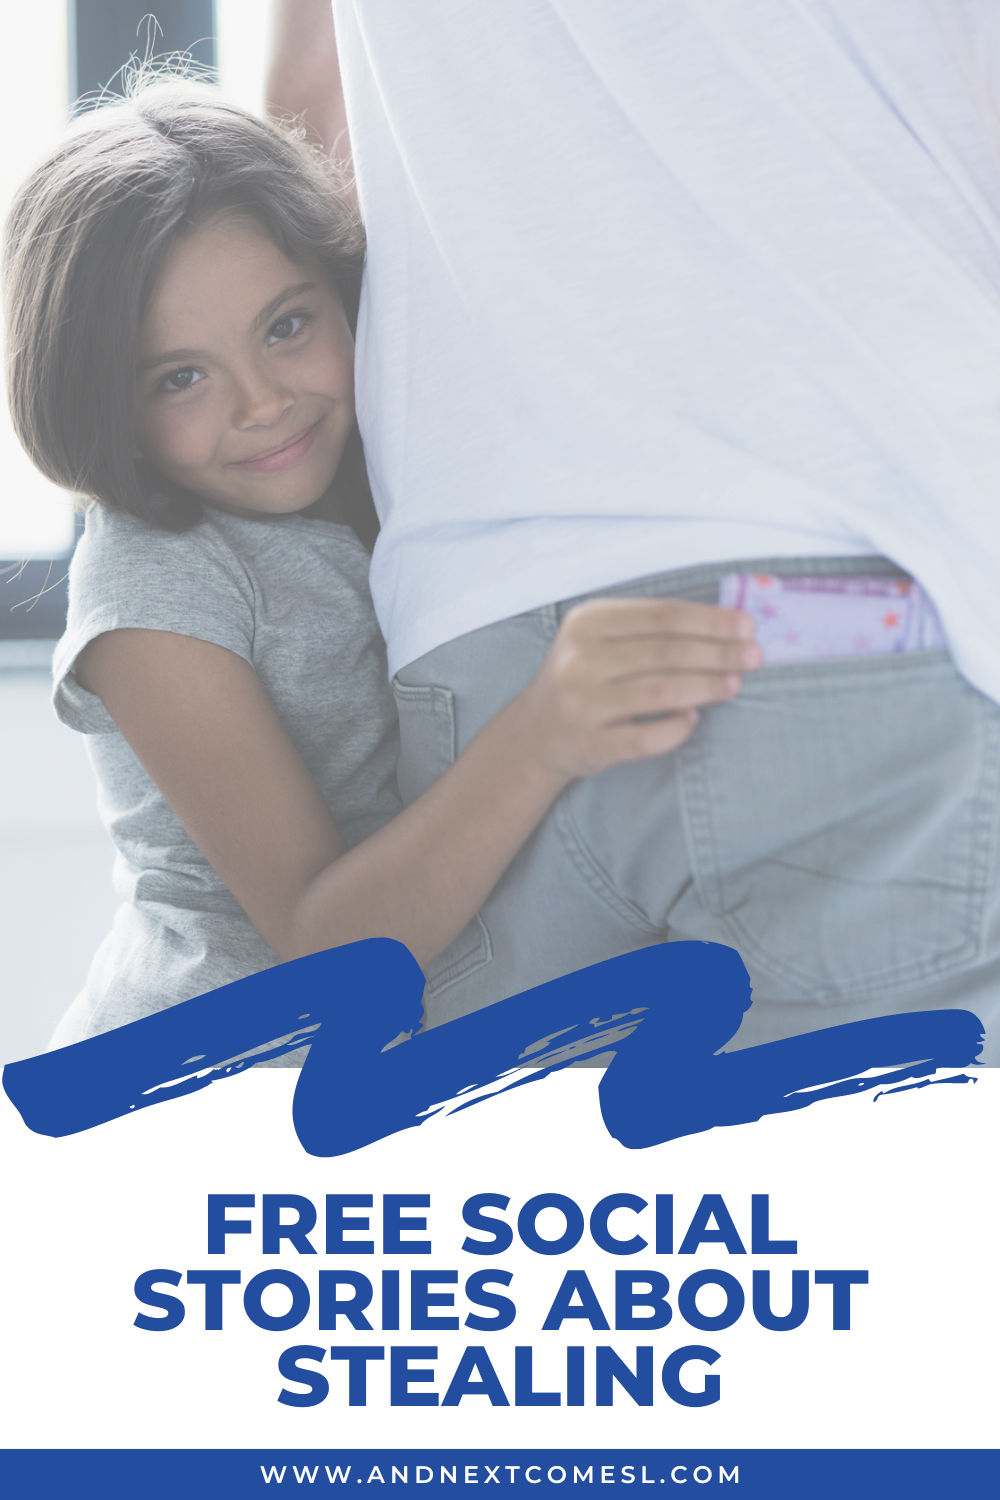 Free social stories about stealing